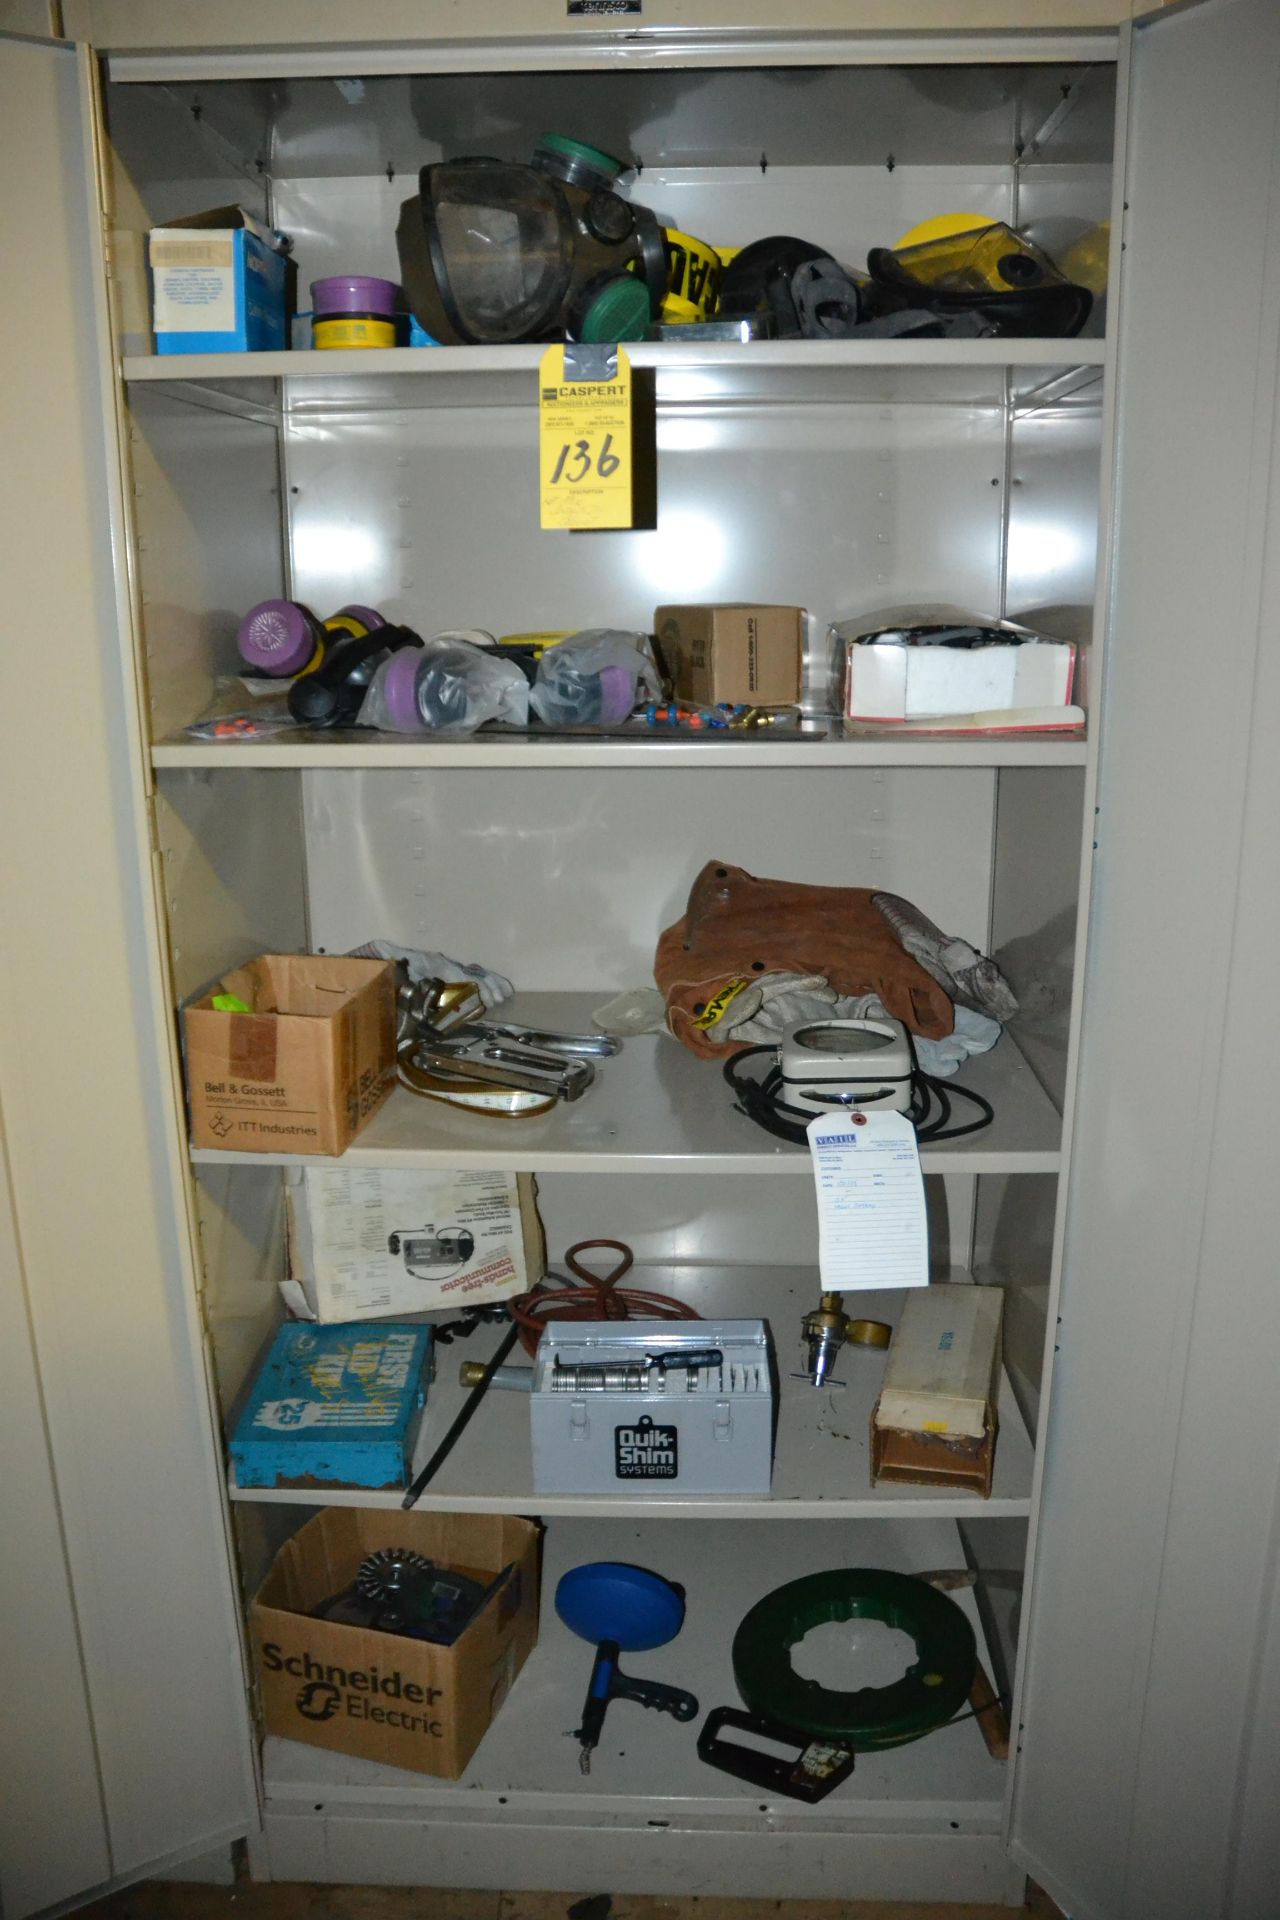 LOT - Misc. Contents in Cabinet